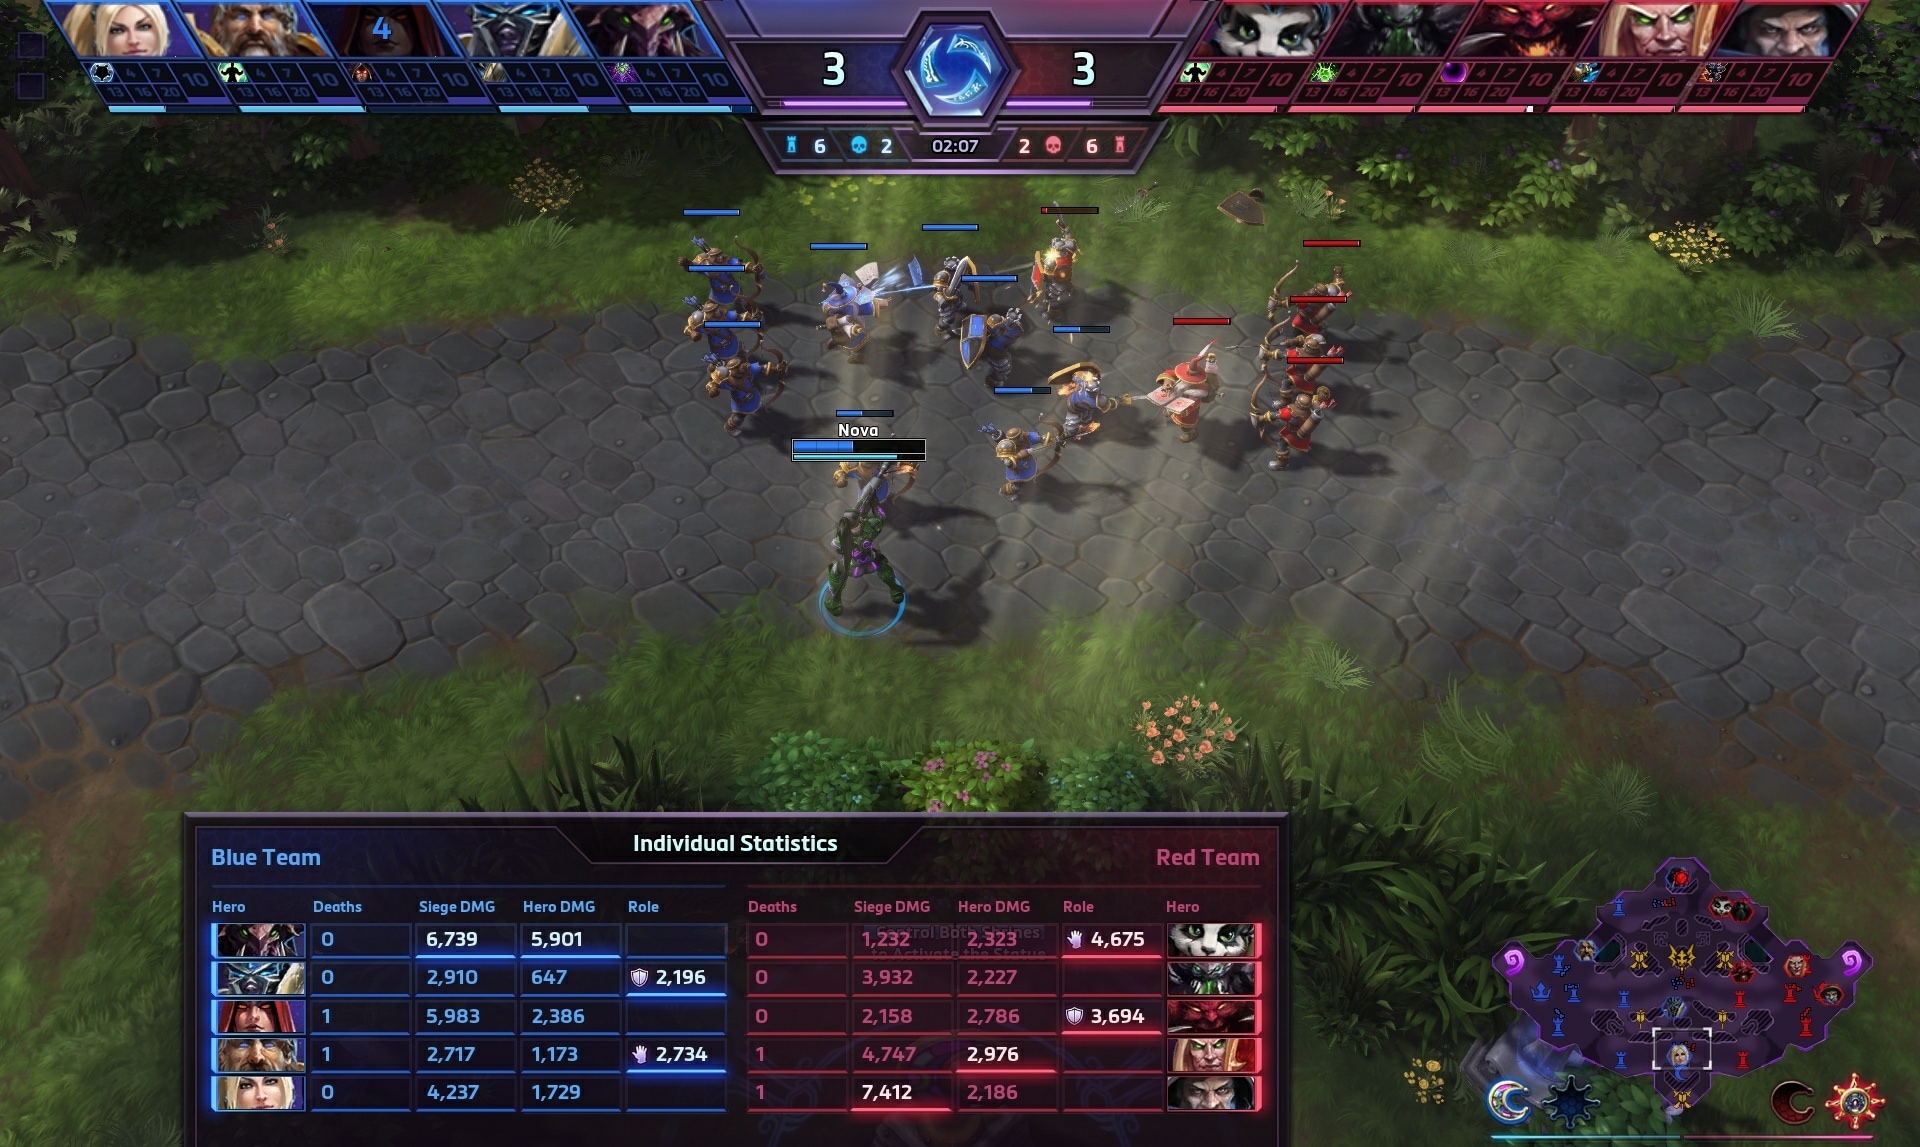 heroes of the storm news download